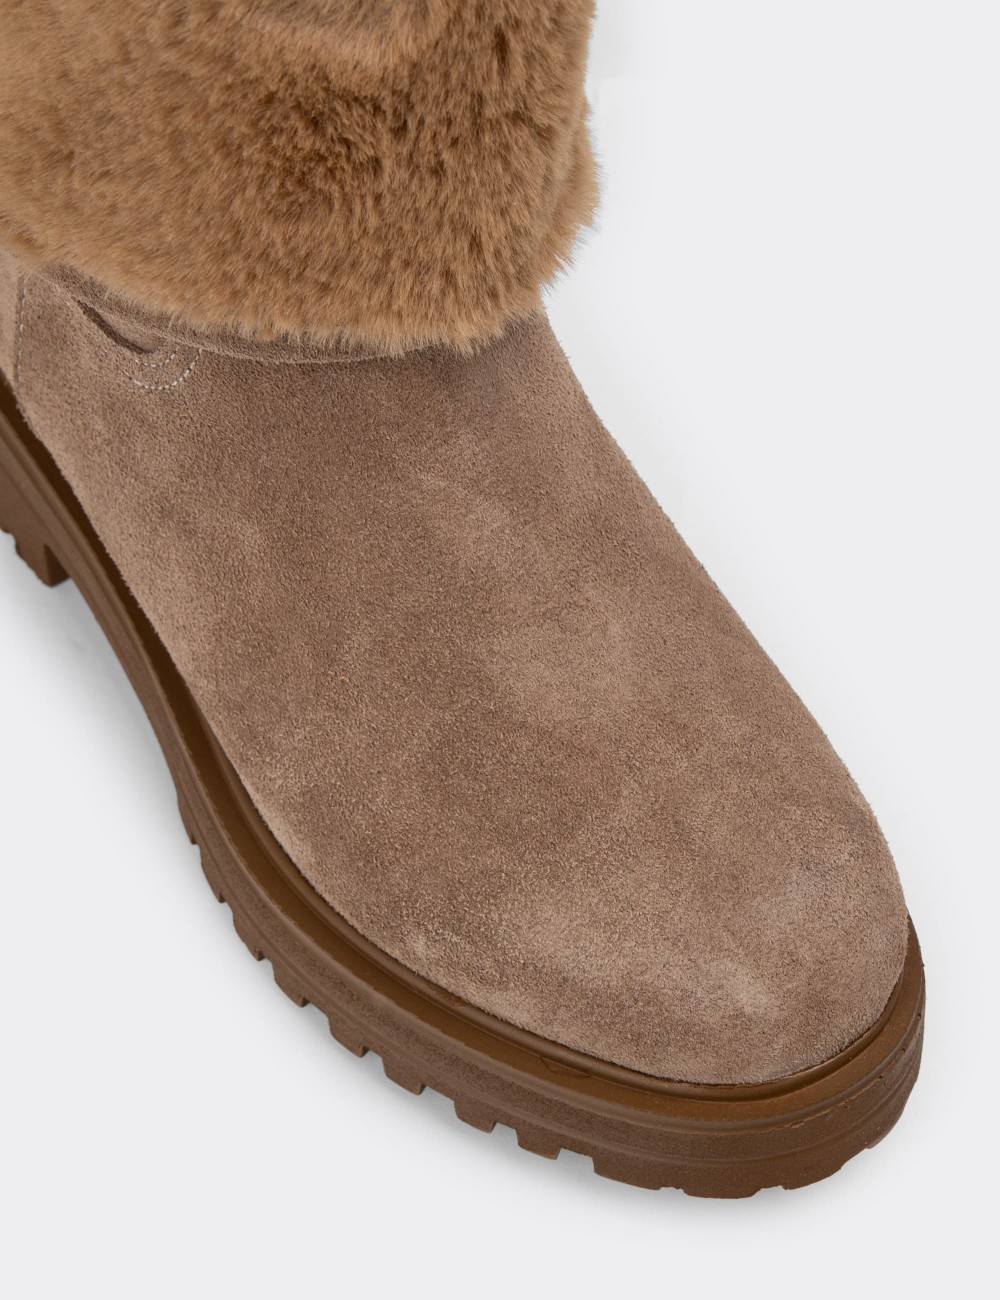 Sandstone Suede Leather Boots - 02150ZVZNE02